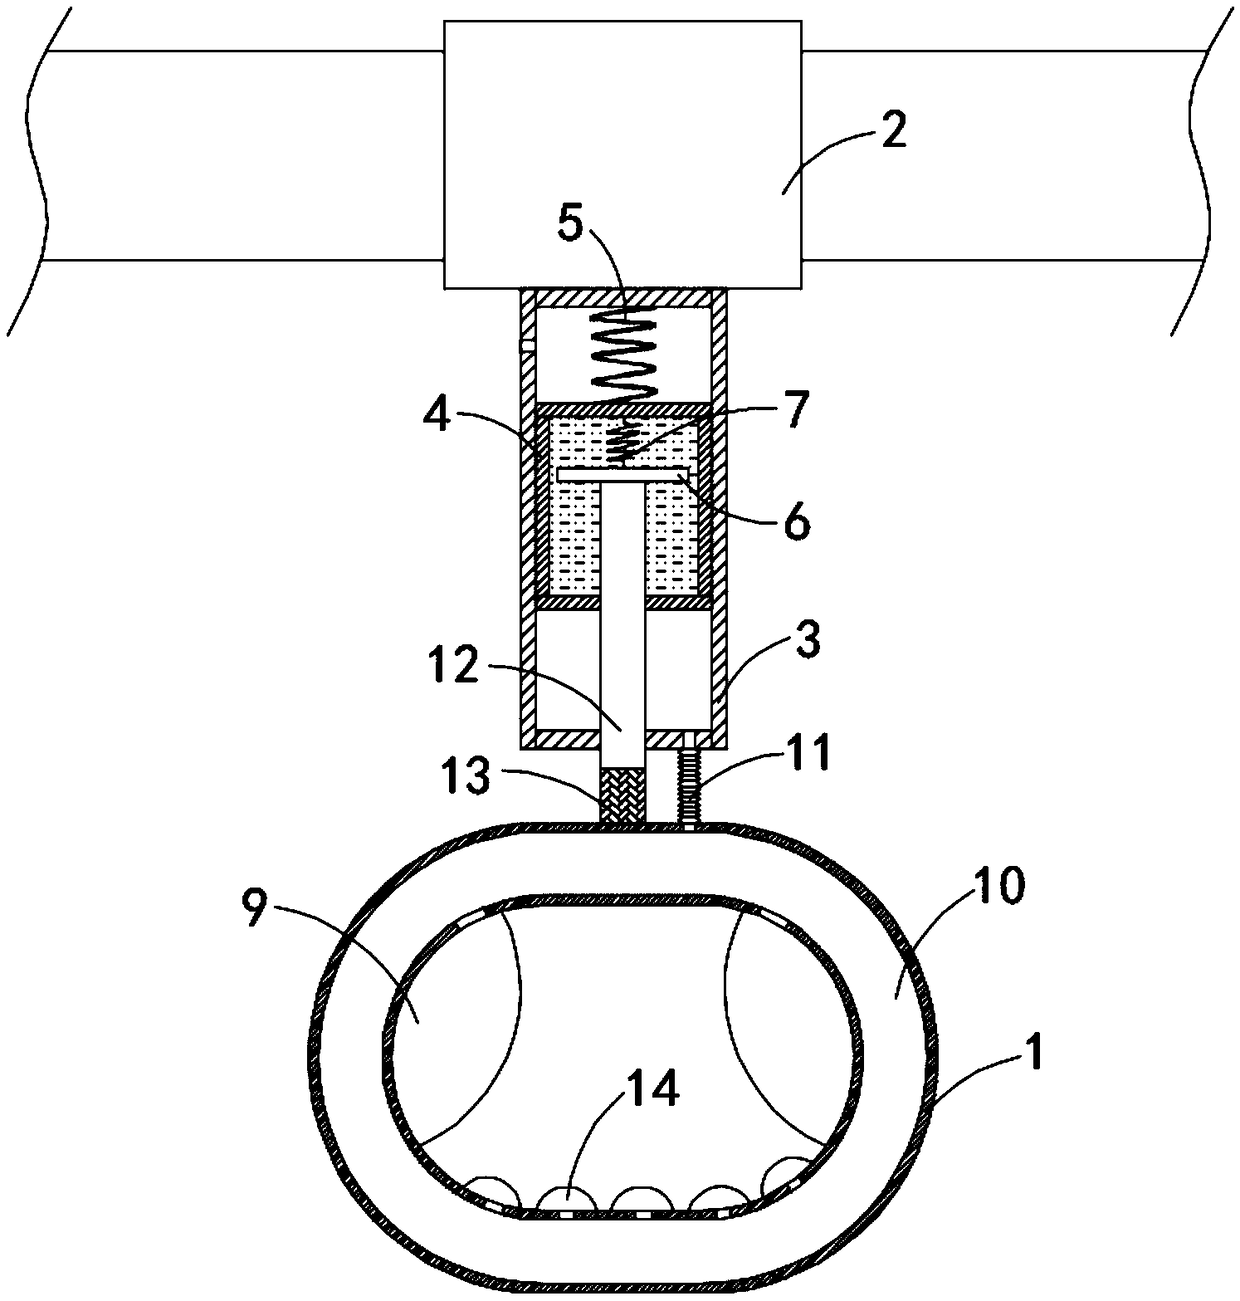 A bus lifting ring for increasing friction